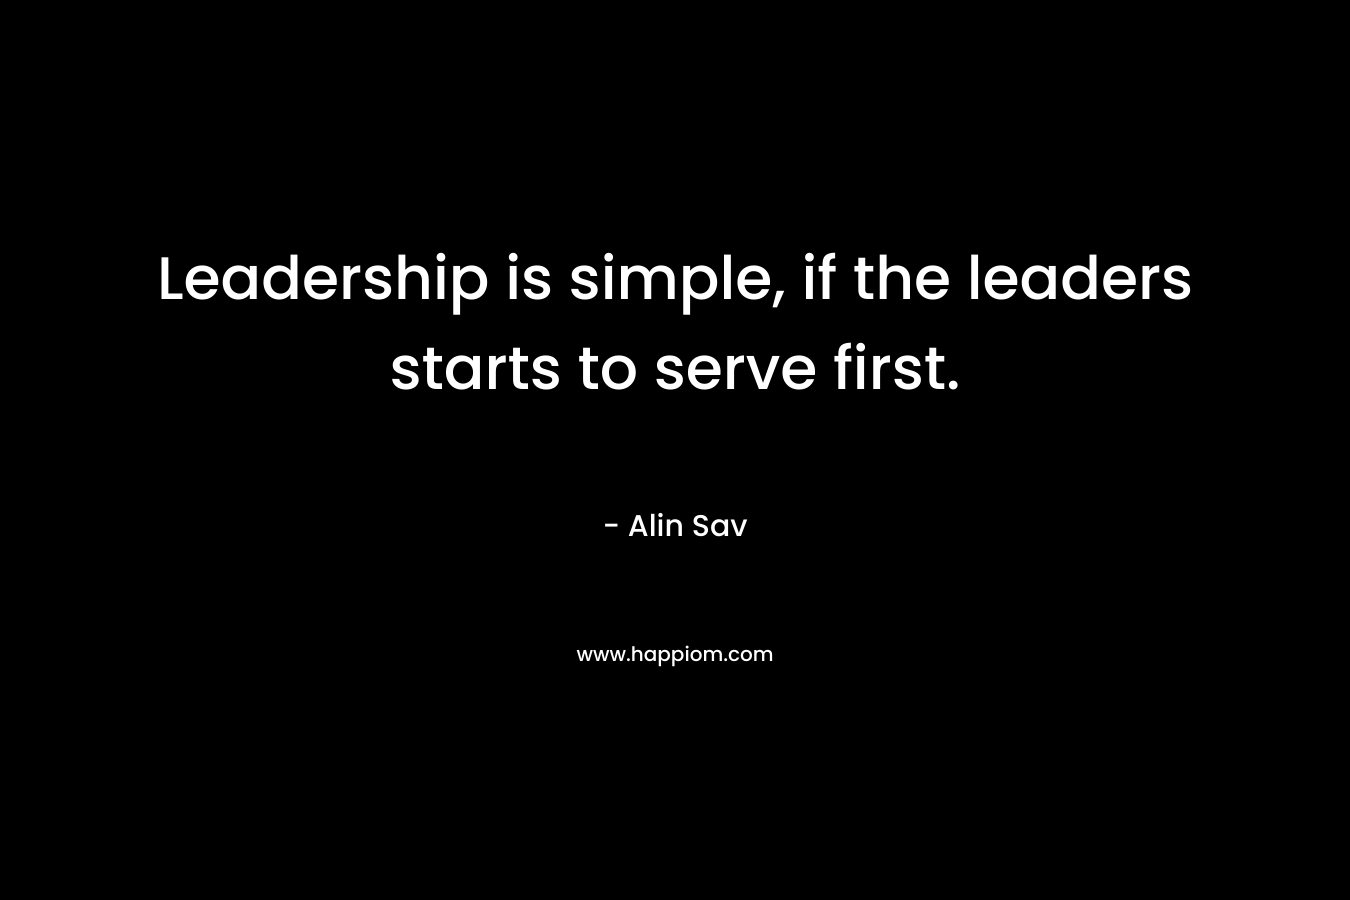 Leadership is simple, if the leaders starts to serve first.